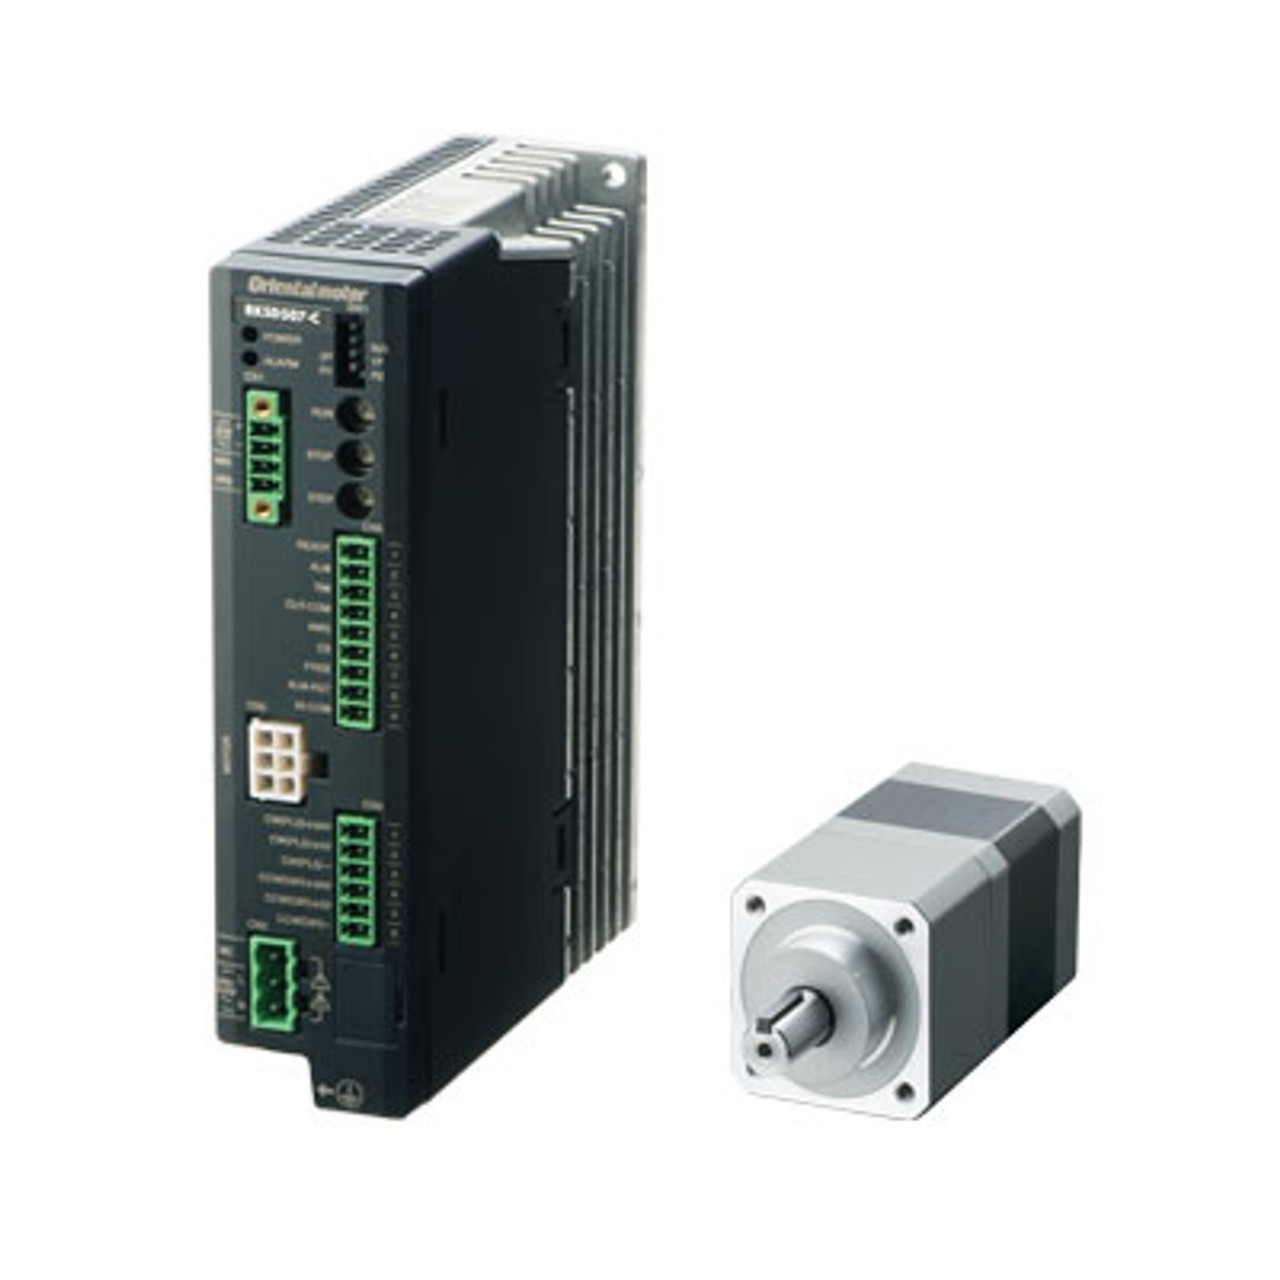 RKS545AC-PS10 - Product Image